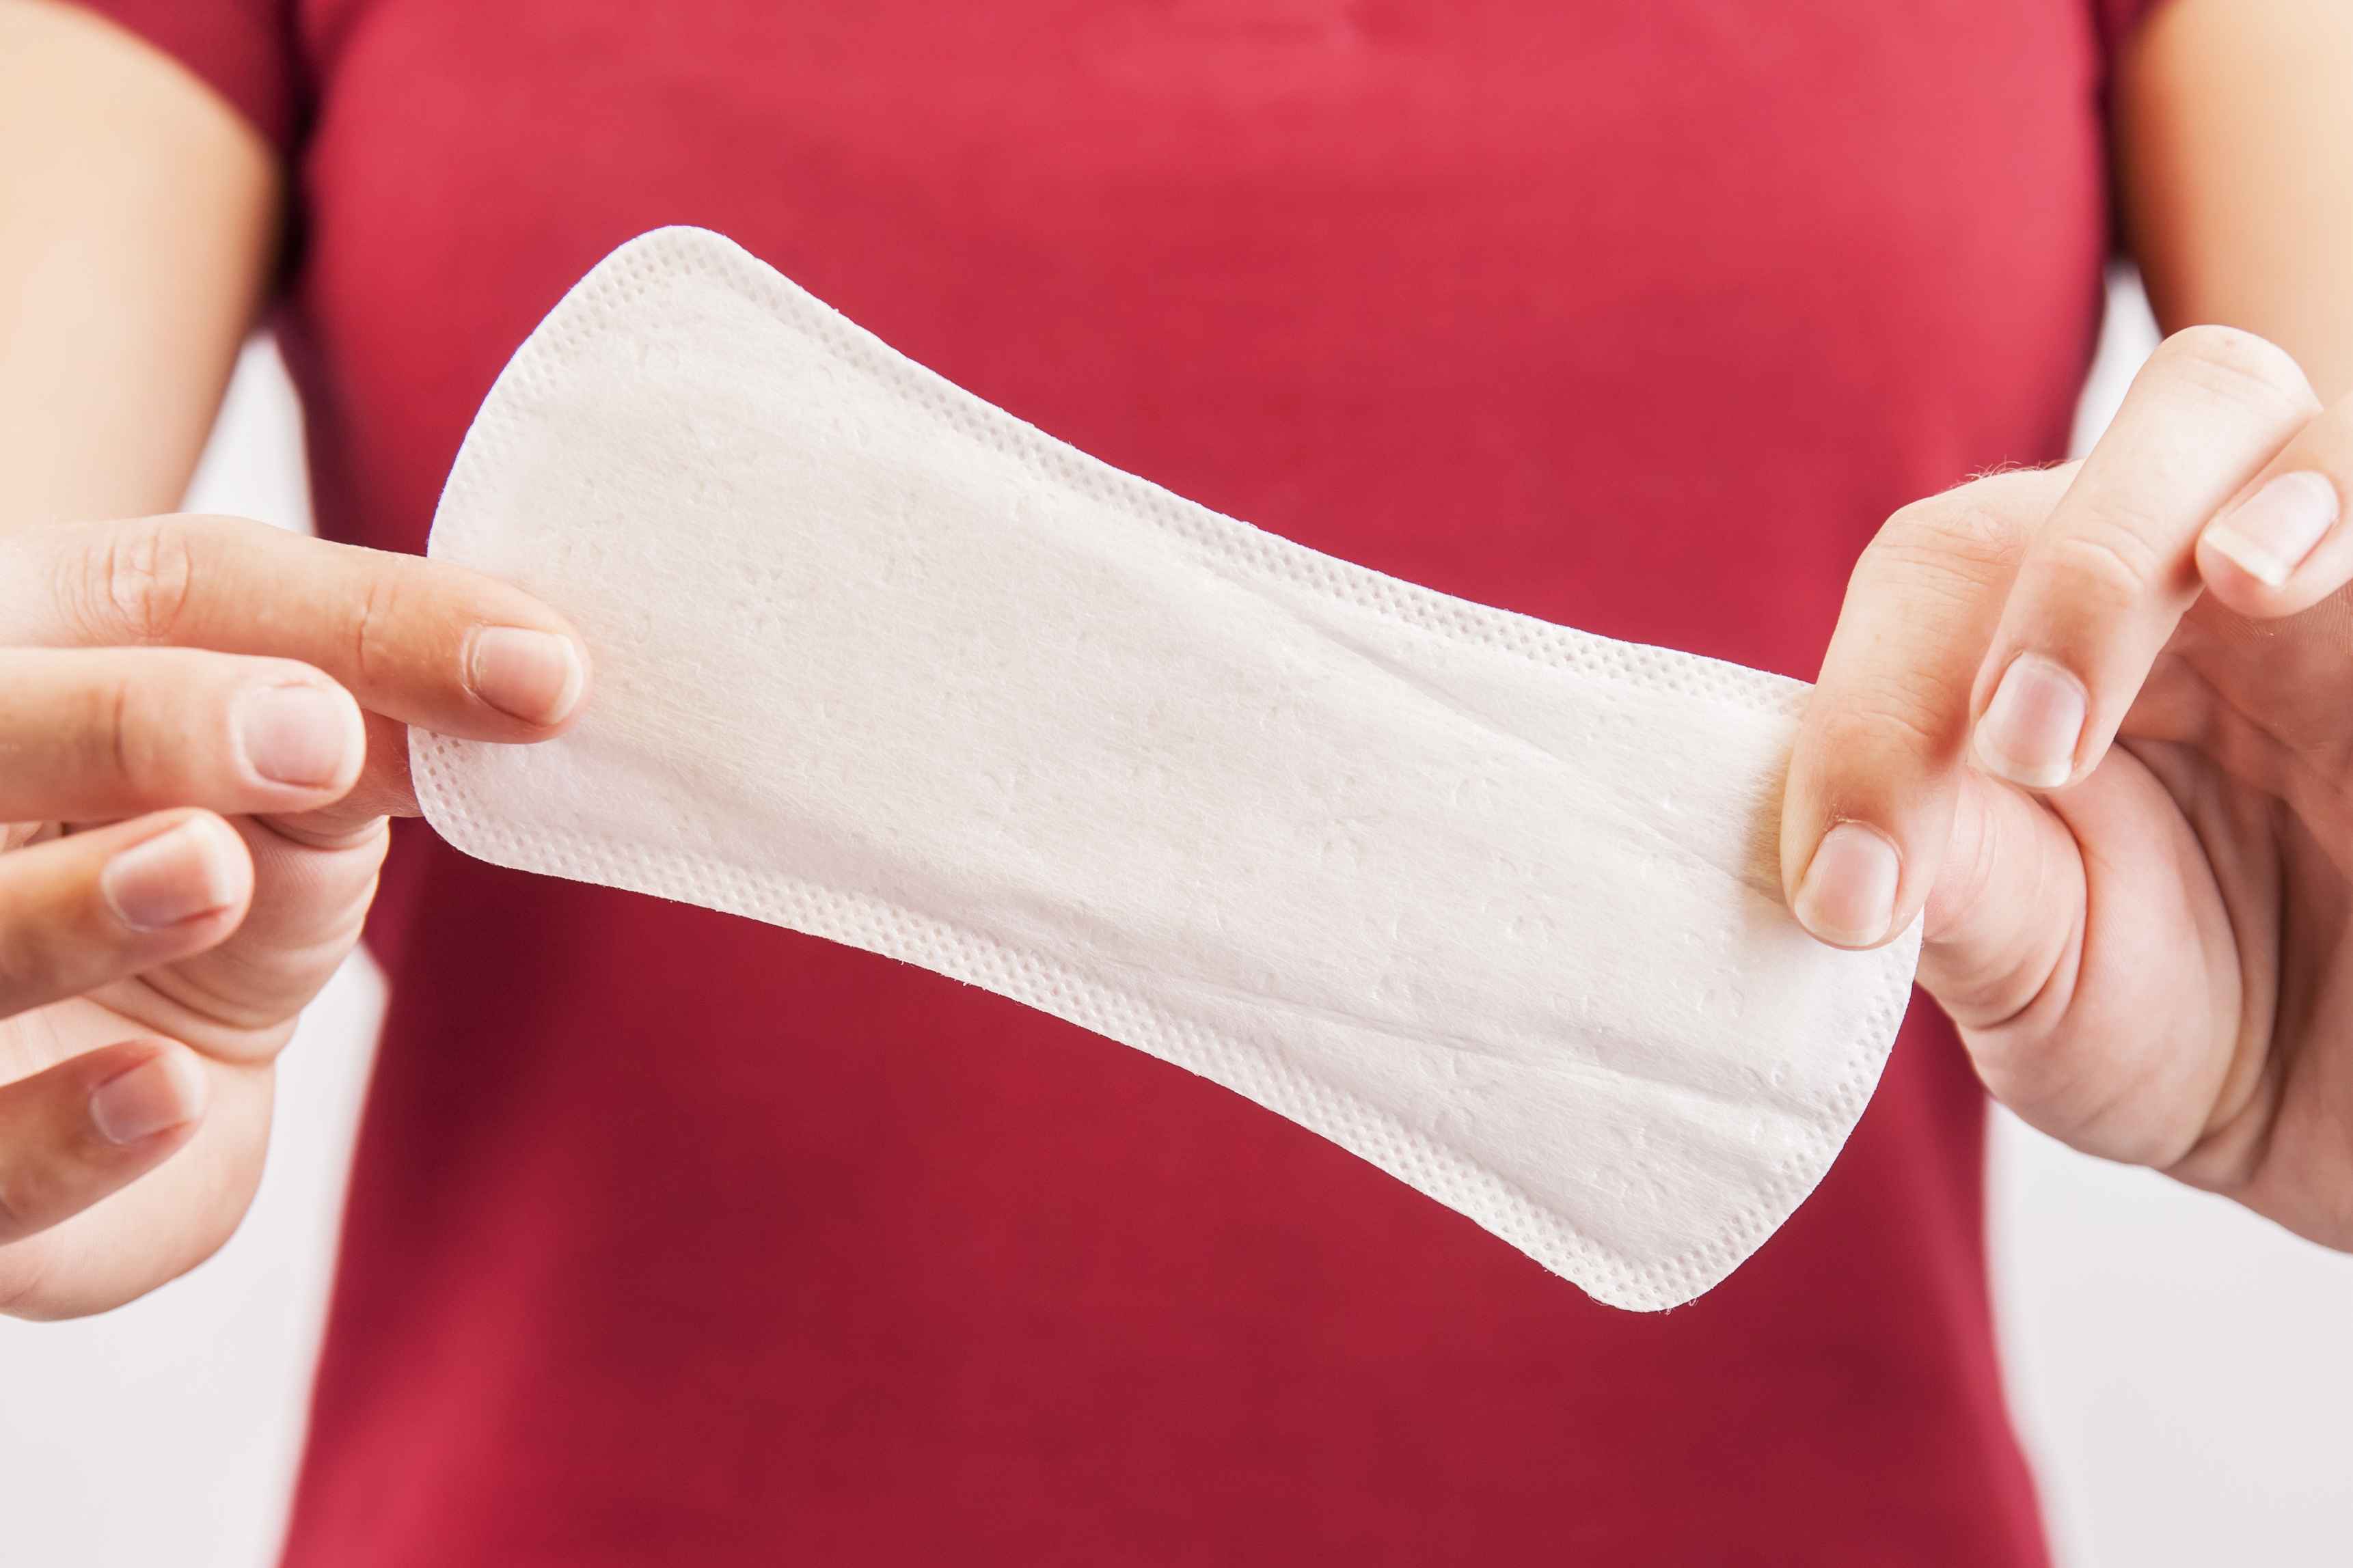 What Makes a Good Panty Liner?